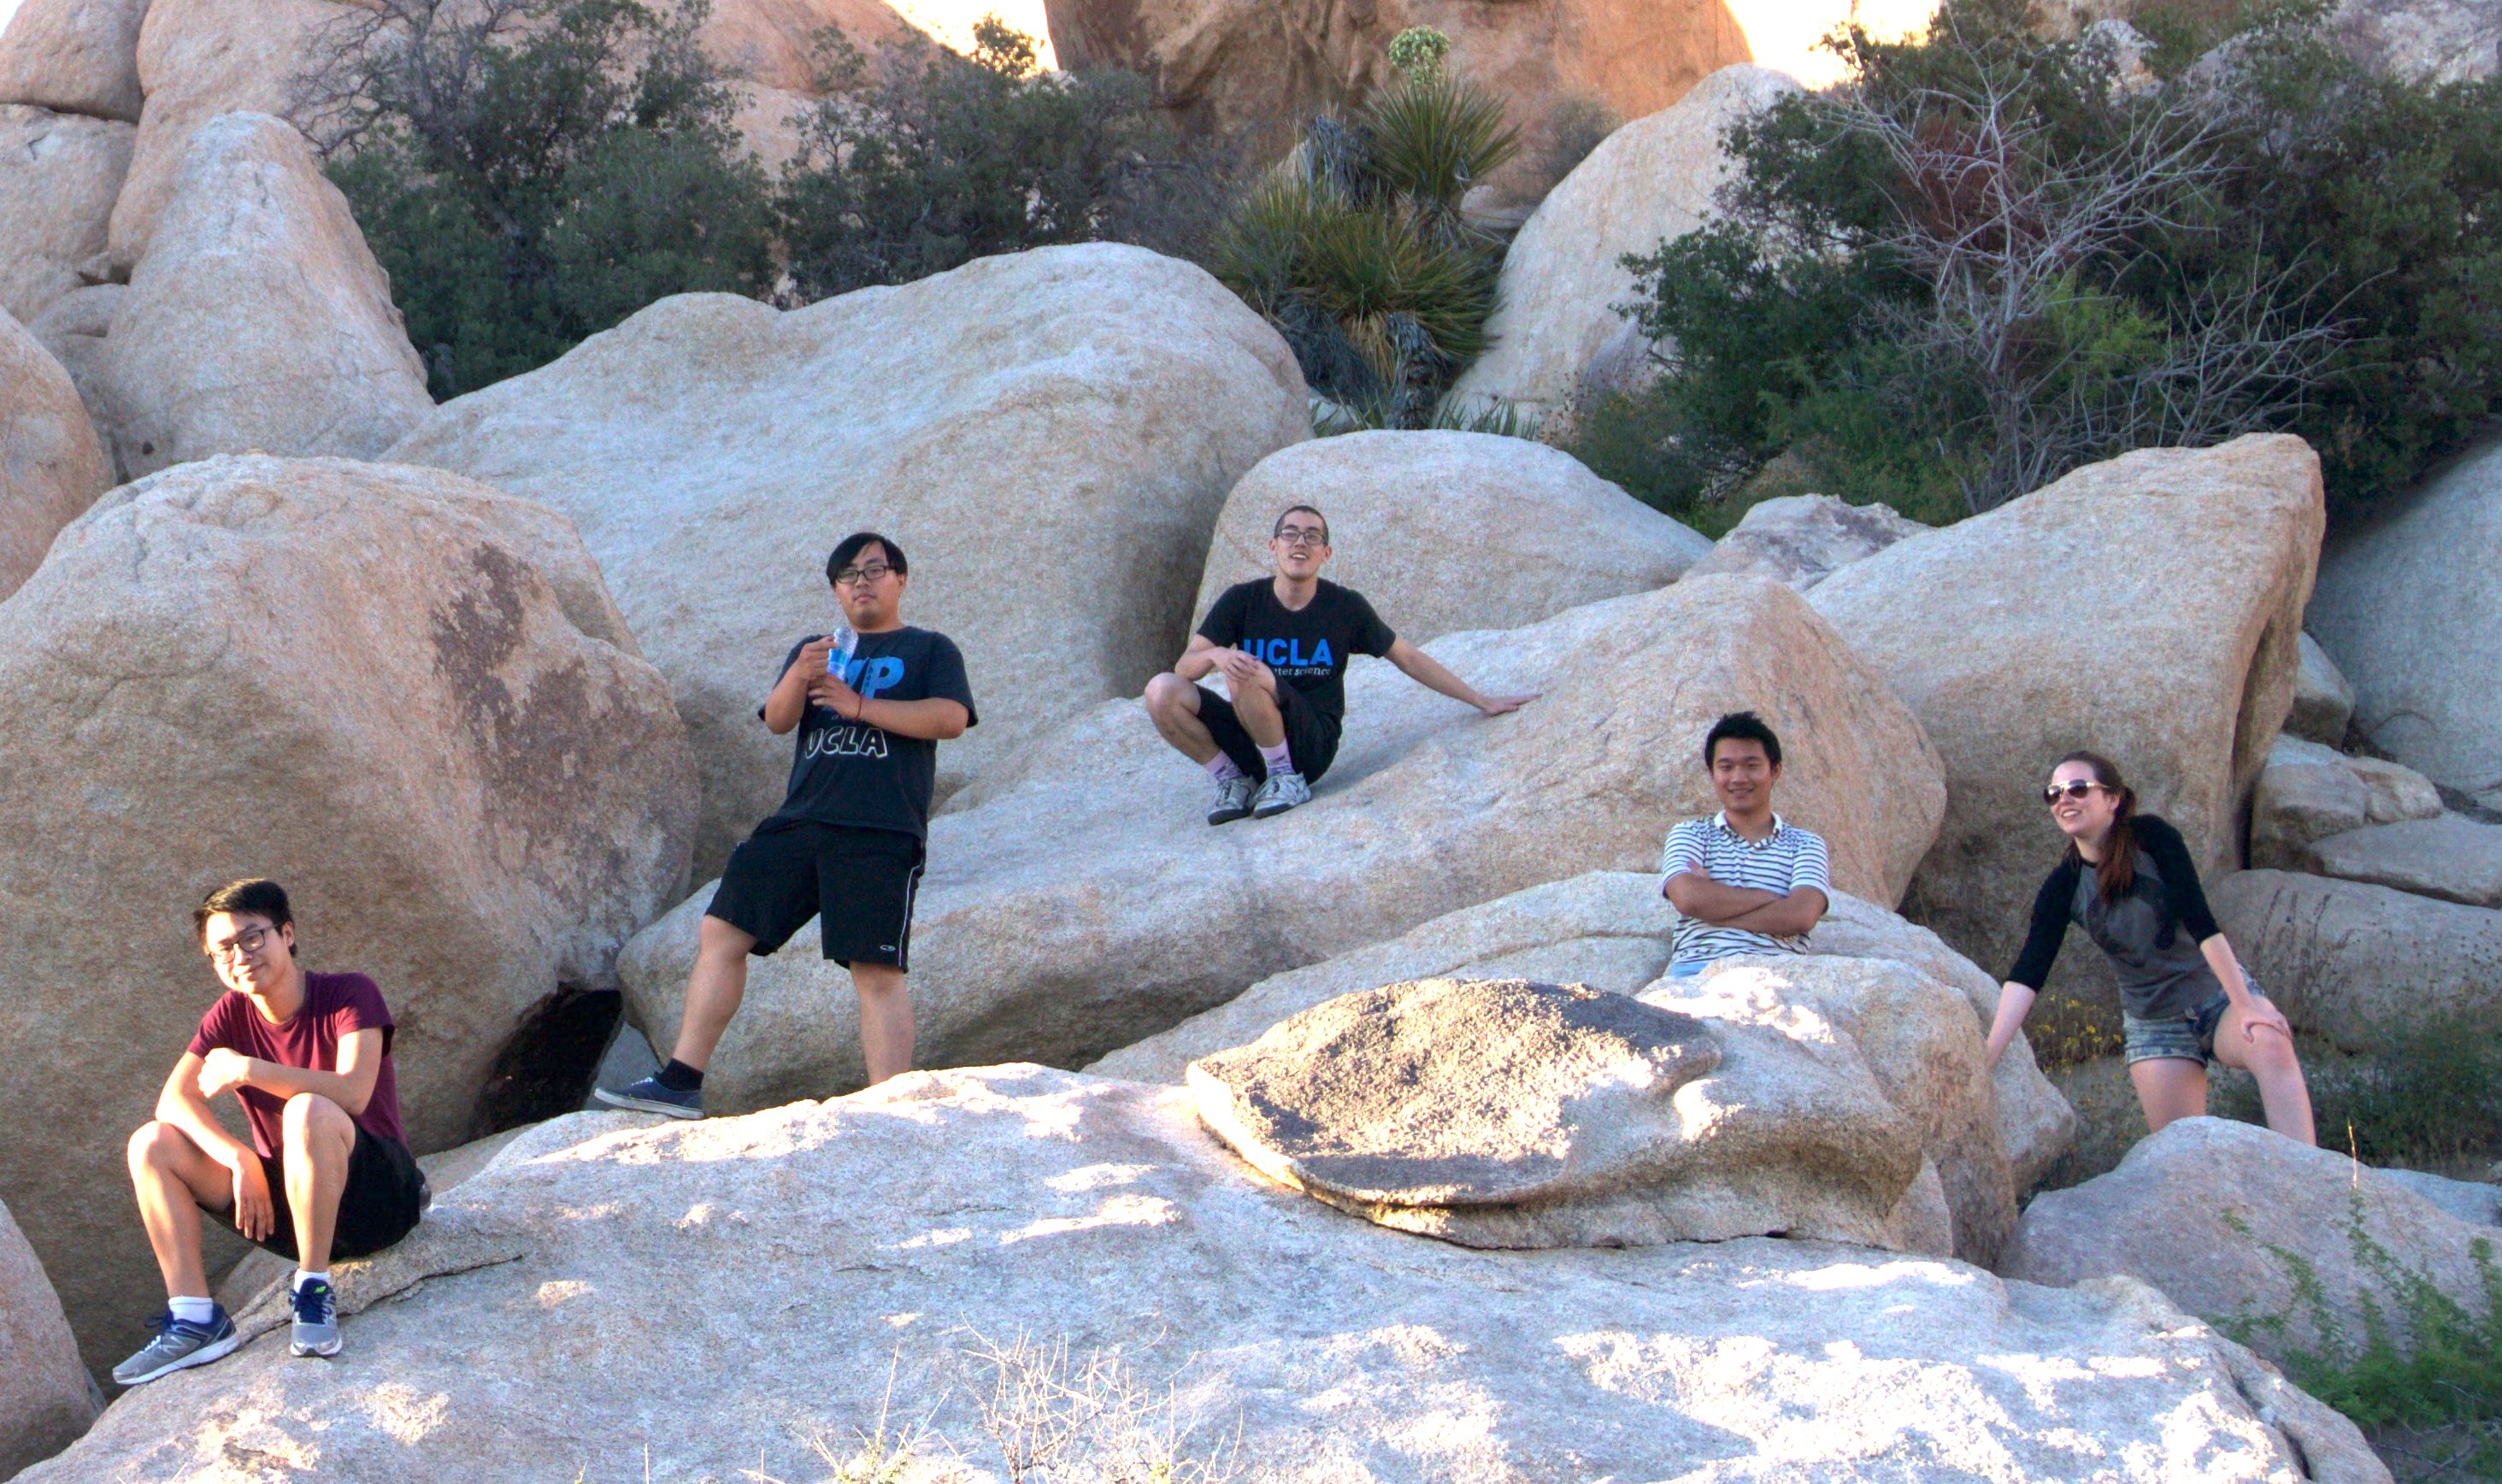 group photo at Yucca Valley